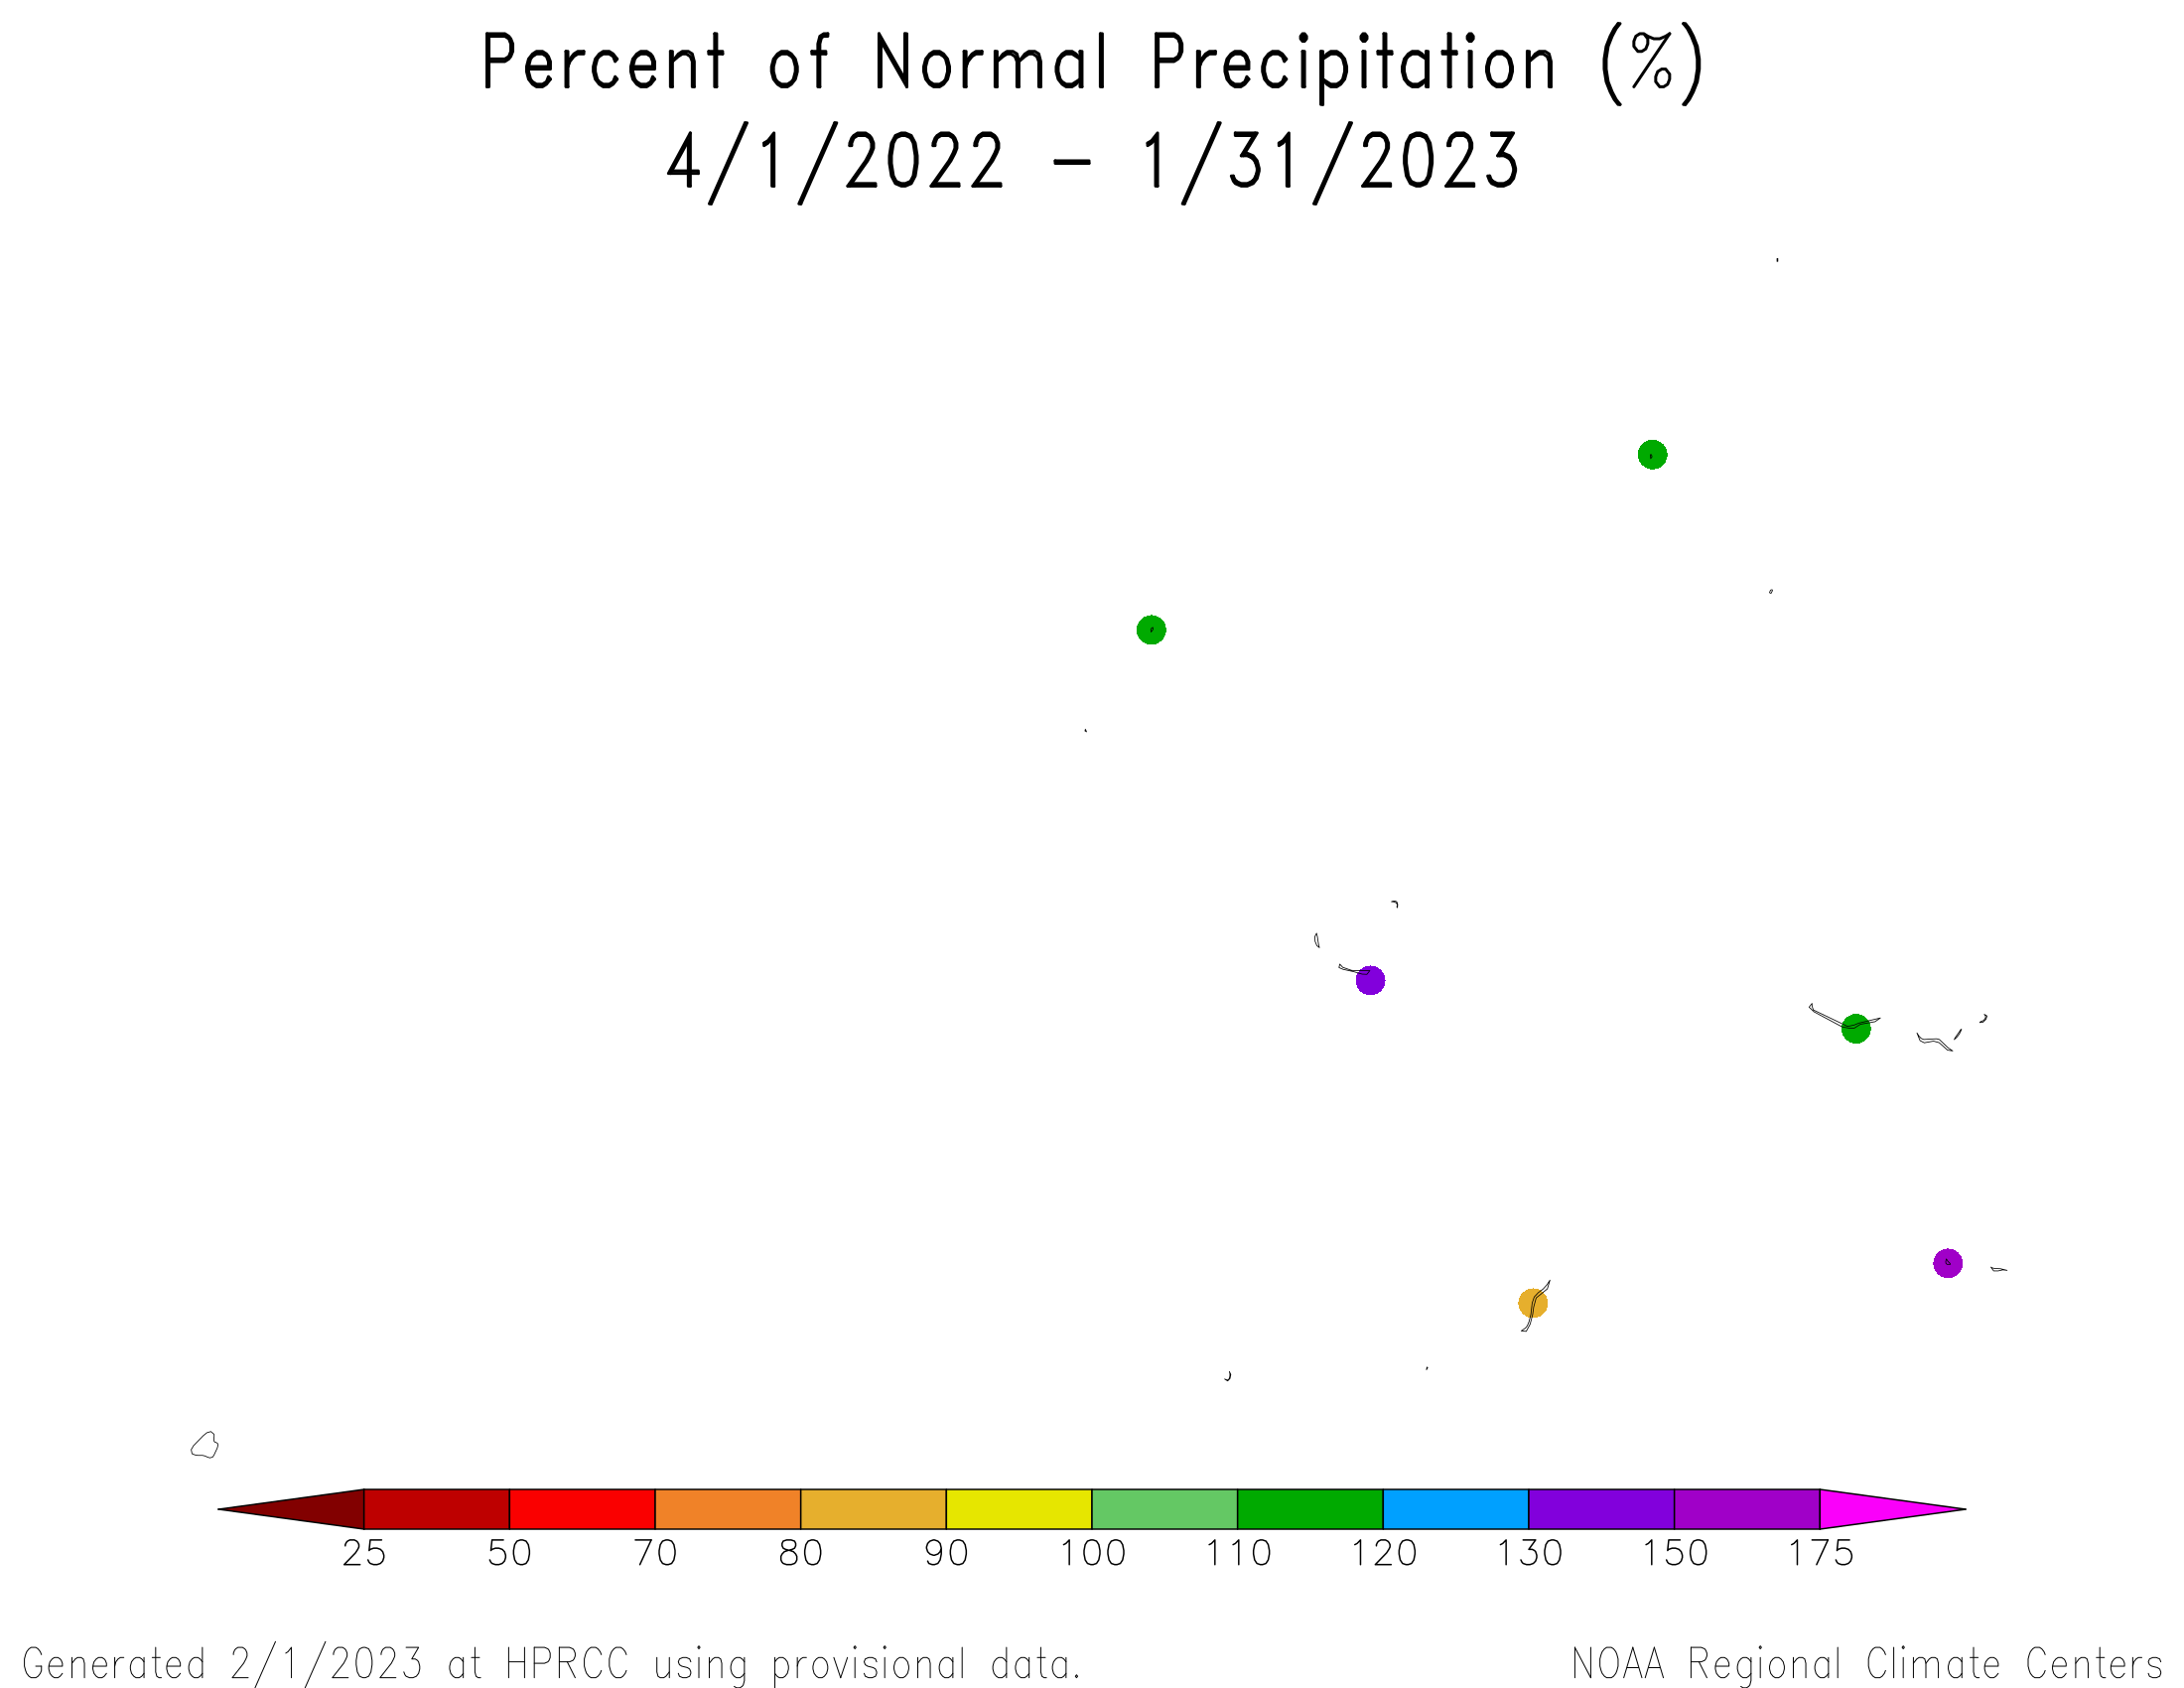 April 2022-January 2023 Percent of Normal Precipitation for the Marshall Islands